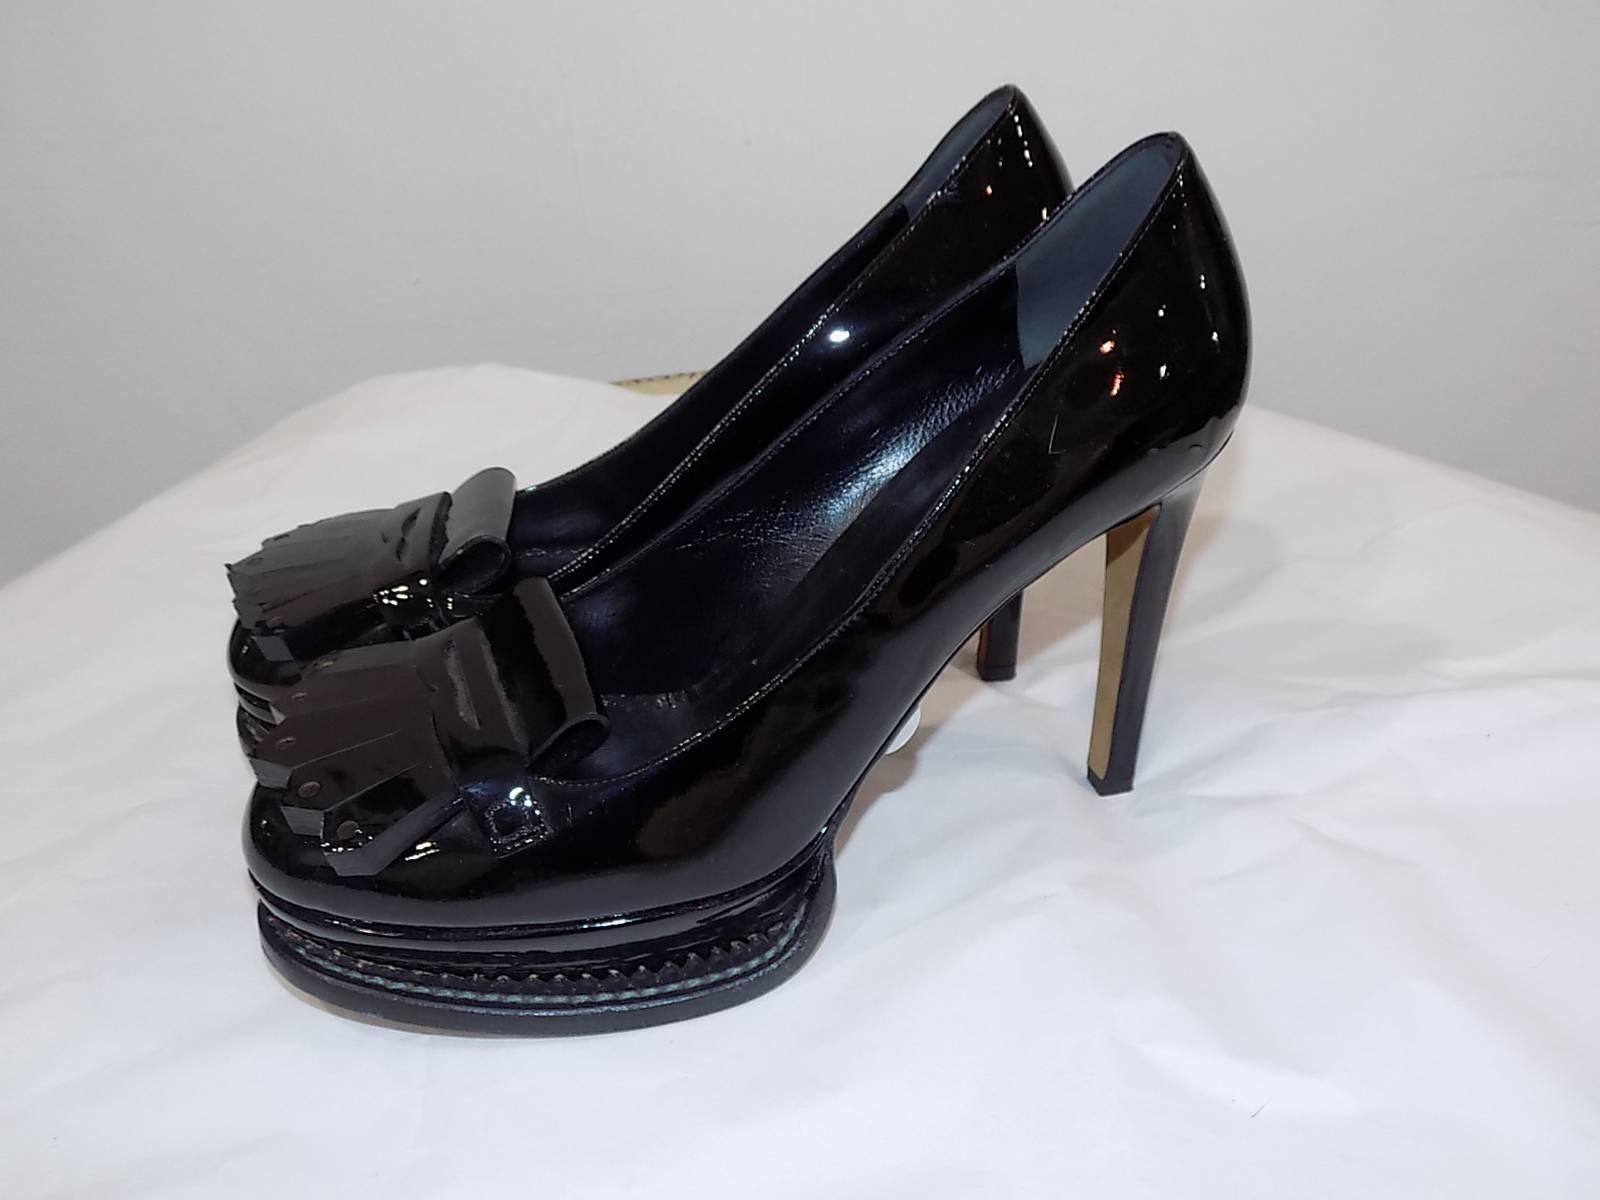 Perfect stylish for work Moschino Fabulous Oxford High Heel black Shoes Pumps sz 39. Heel 5